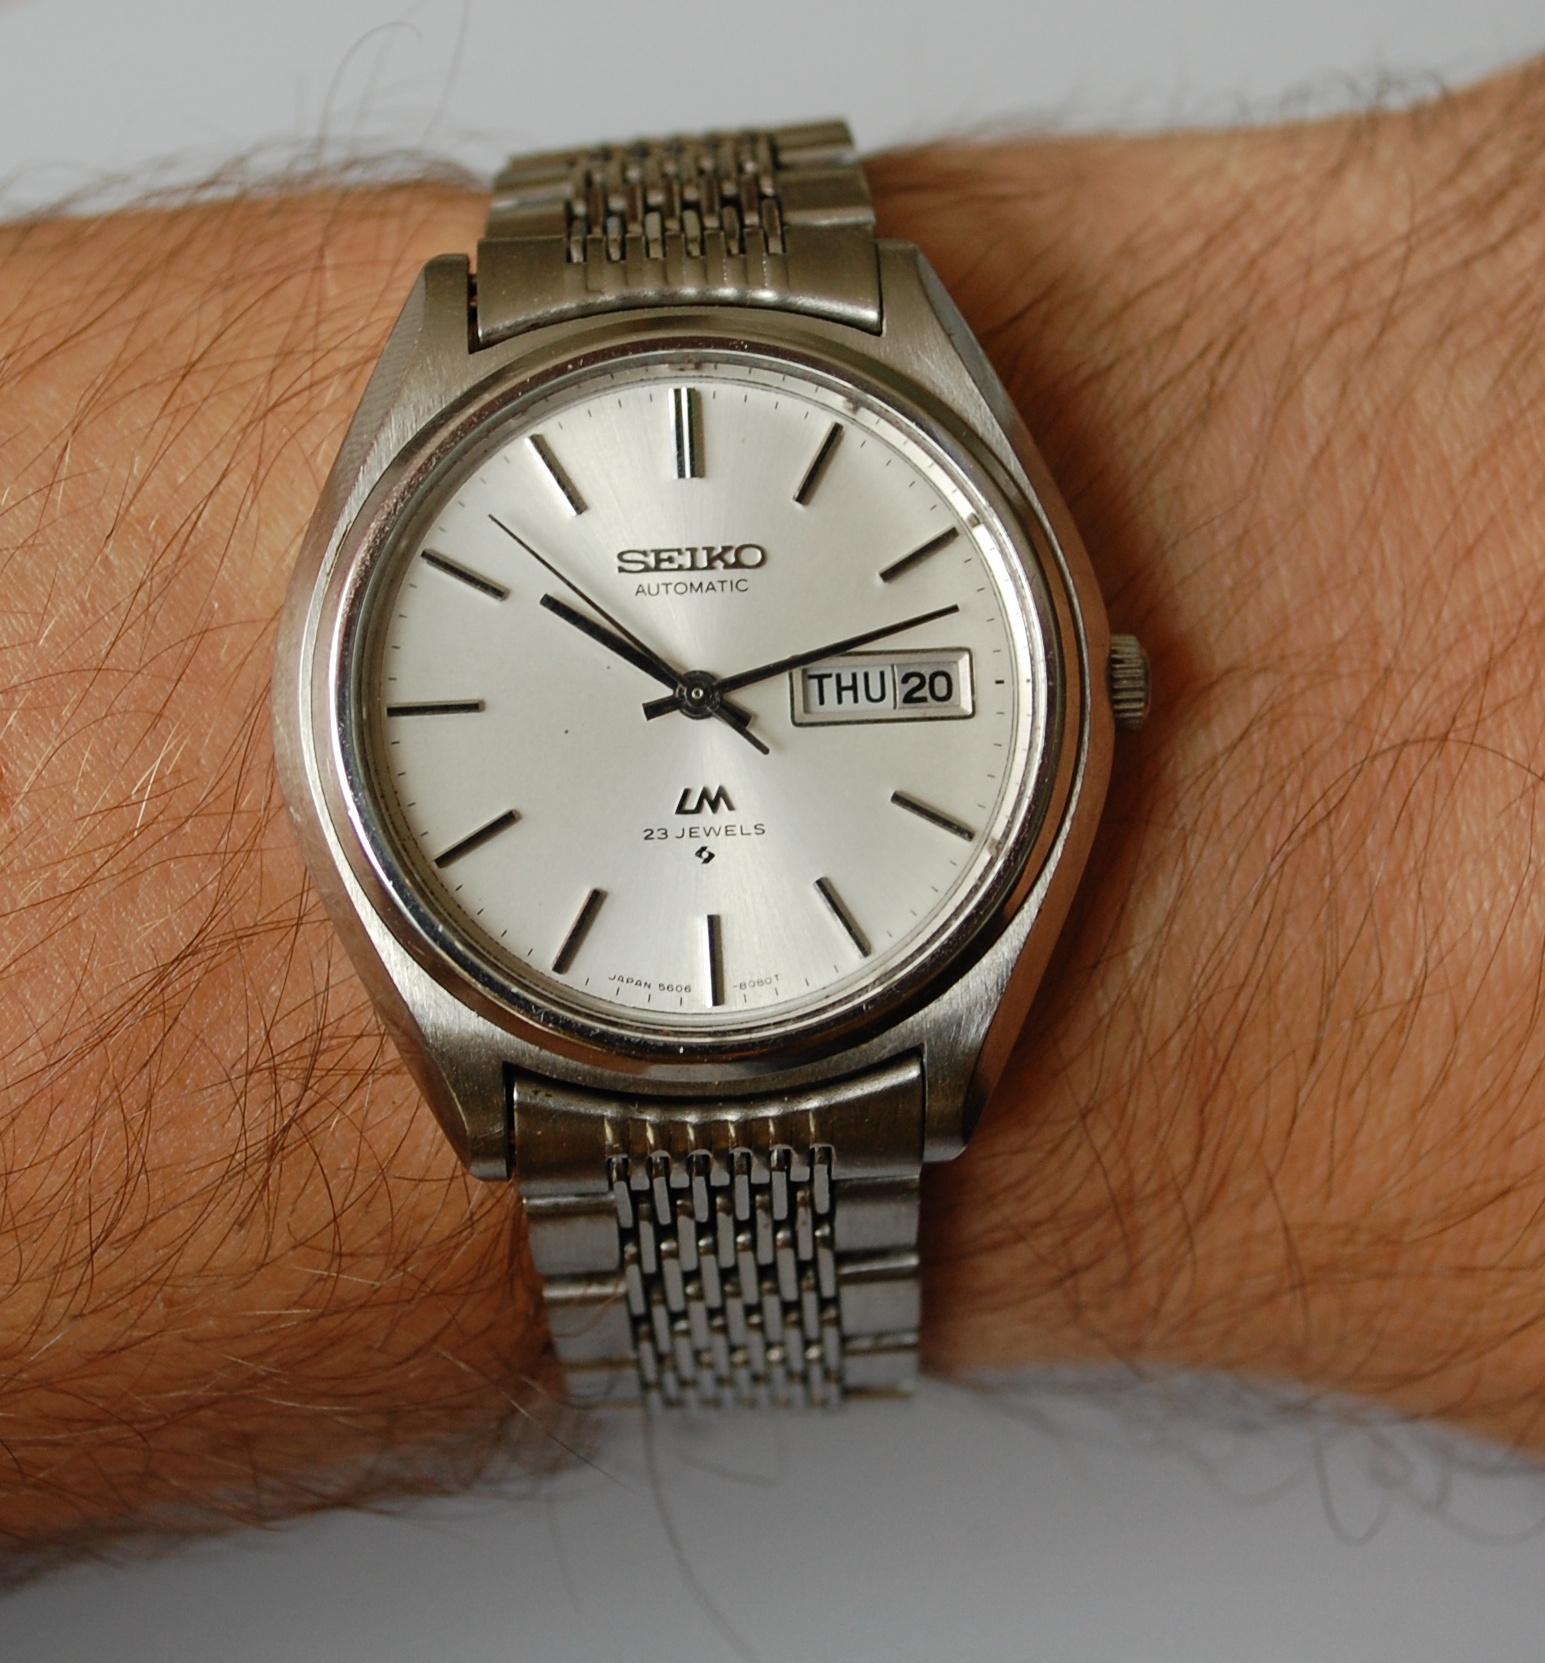 SOLD 1974 Seiko LM (Lord Matic) - Birth Year Watches